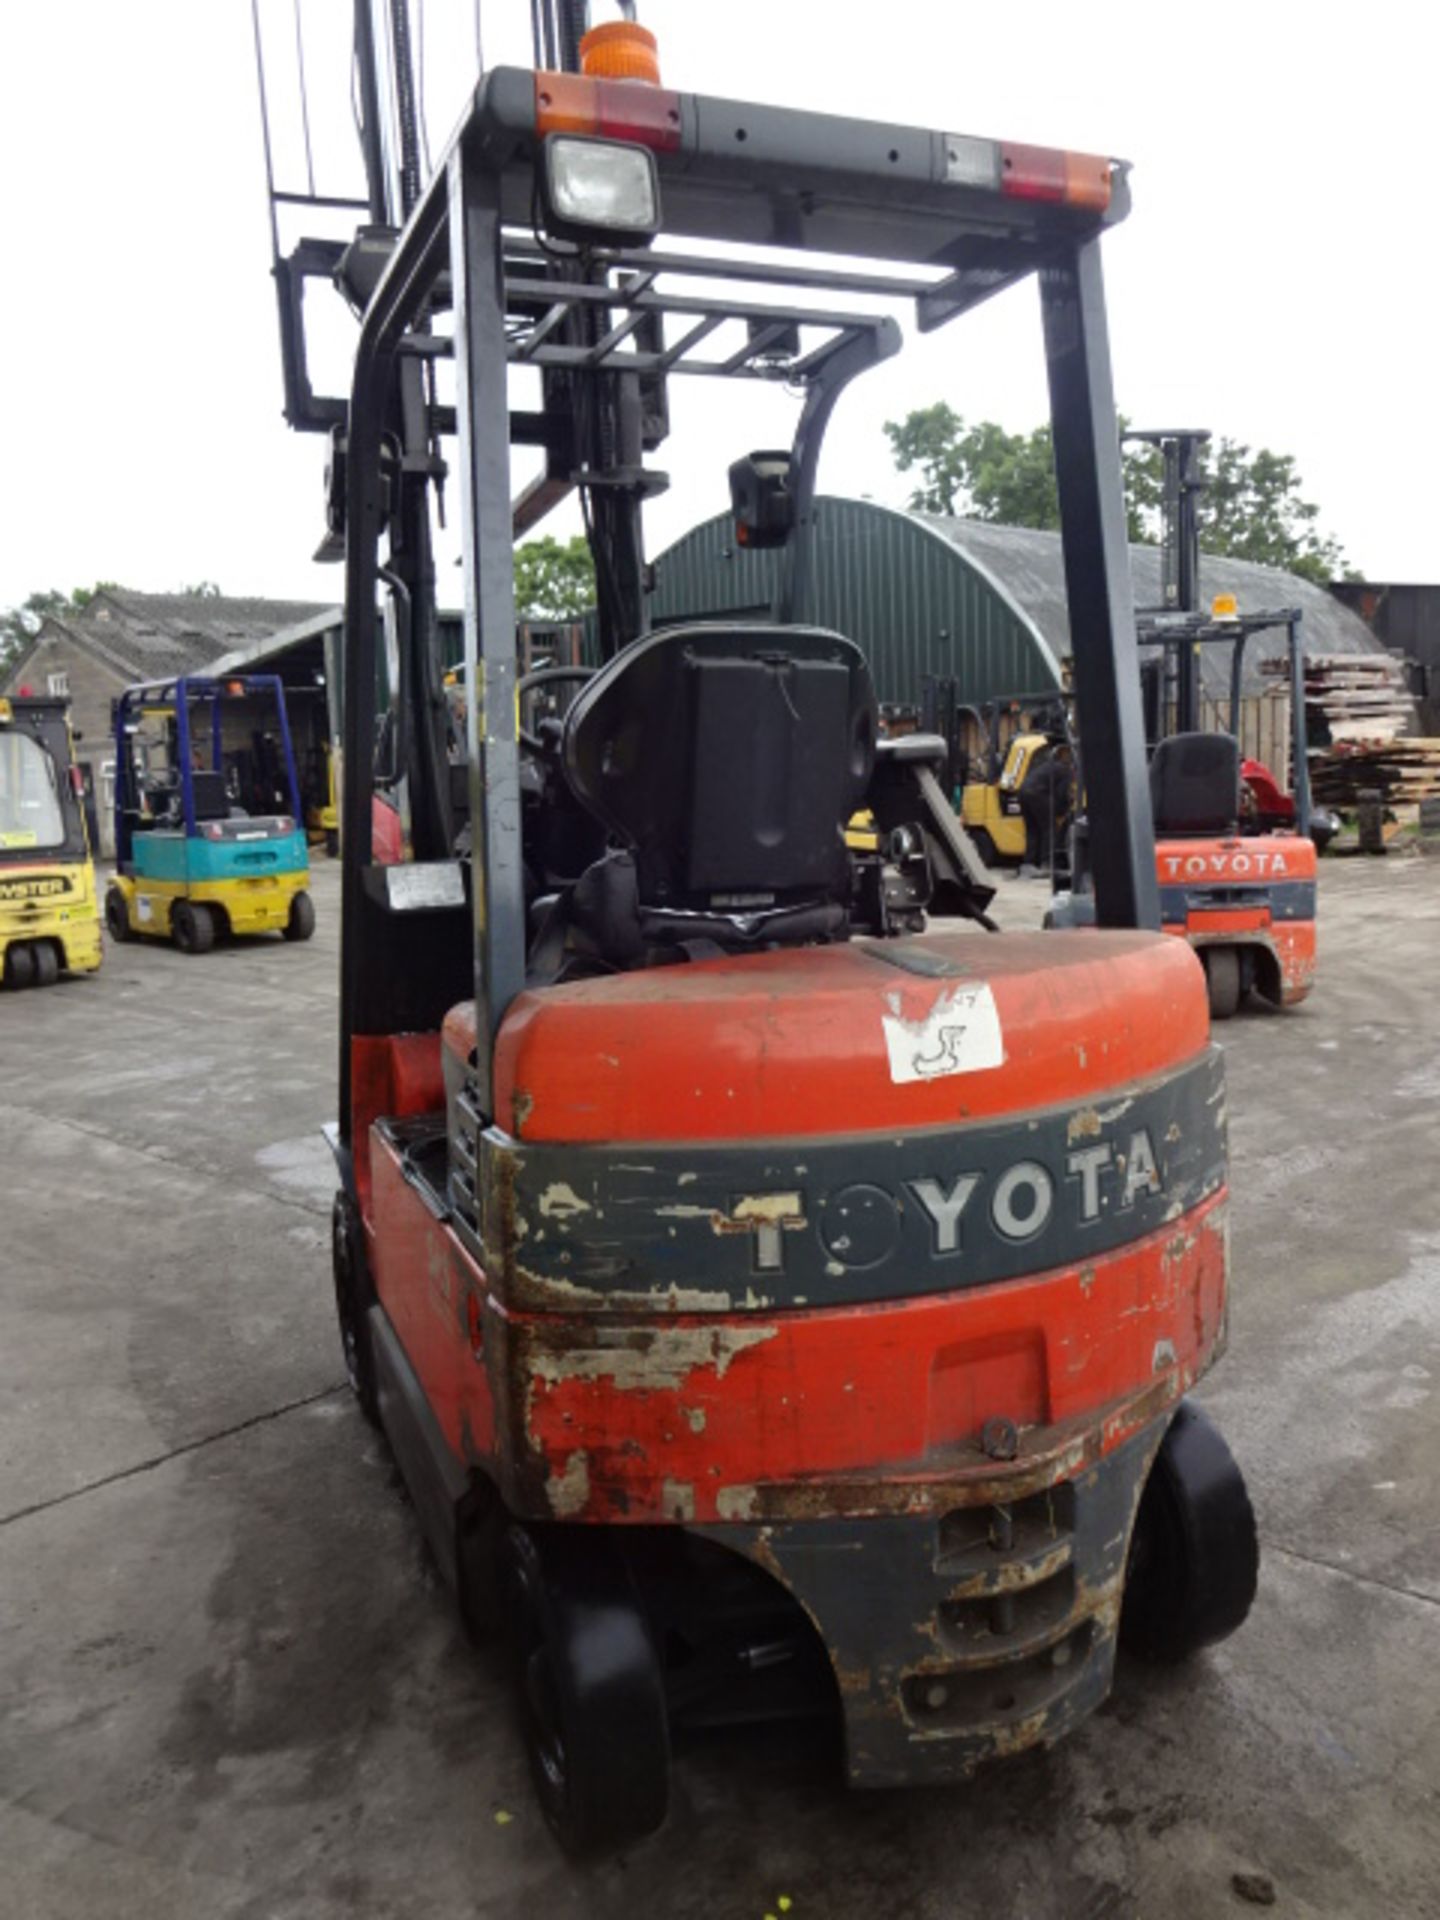 2010 TOYOTA 7FBMF16 1.6t battery driven forklift truck S/n: E14796 with duplex mast & side-shift ( - Image 7 of 7